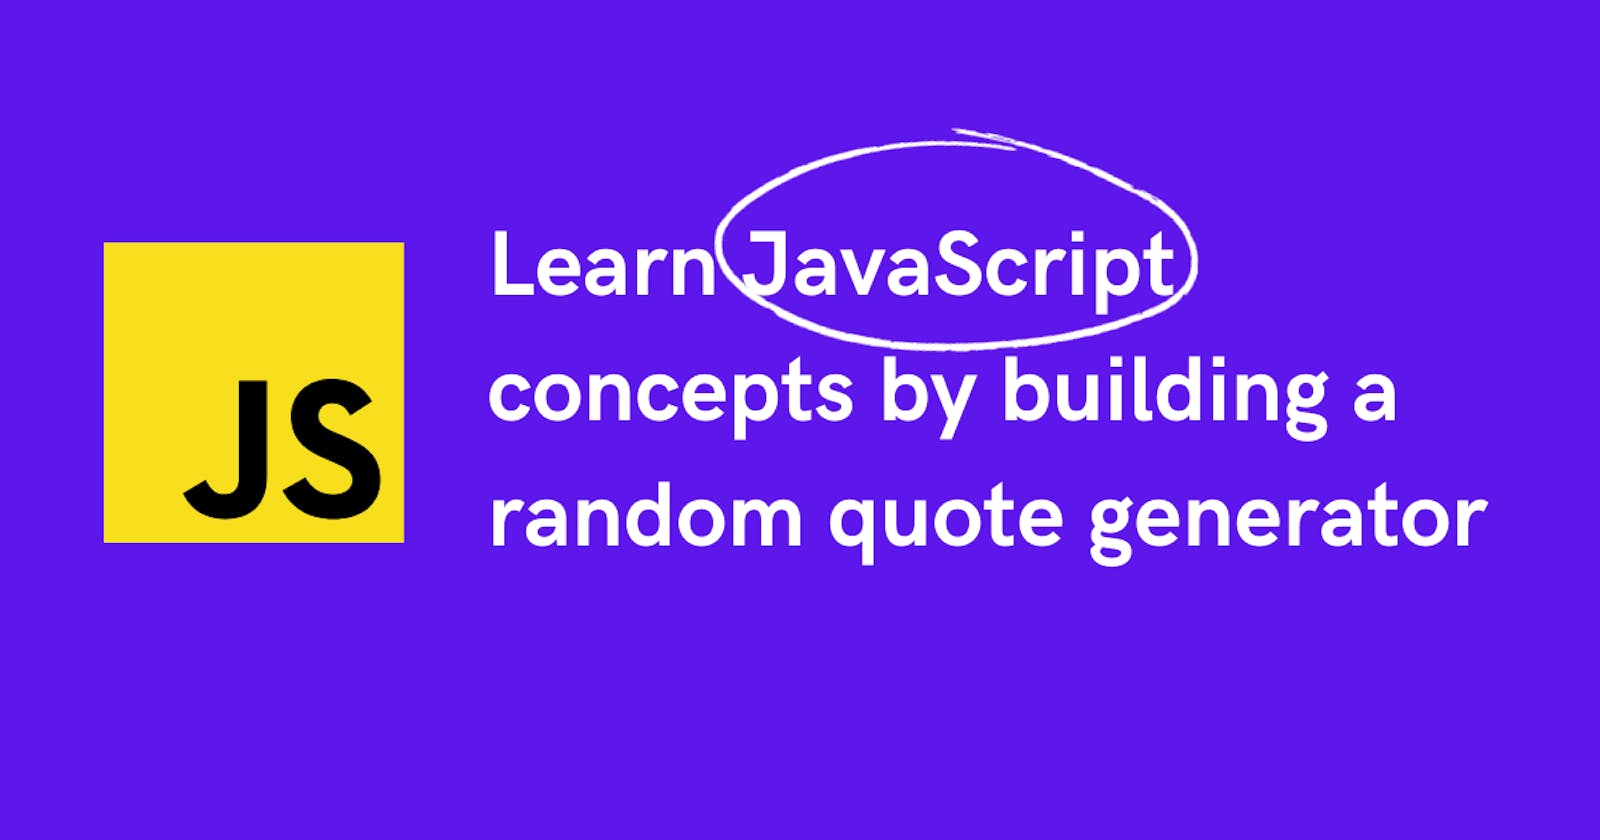 Learn JavaScript concepts by building a random quote generator